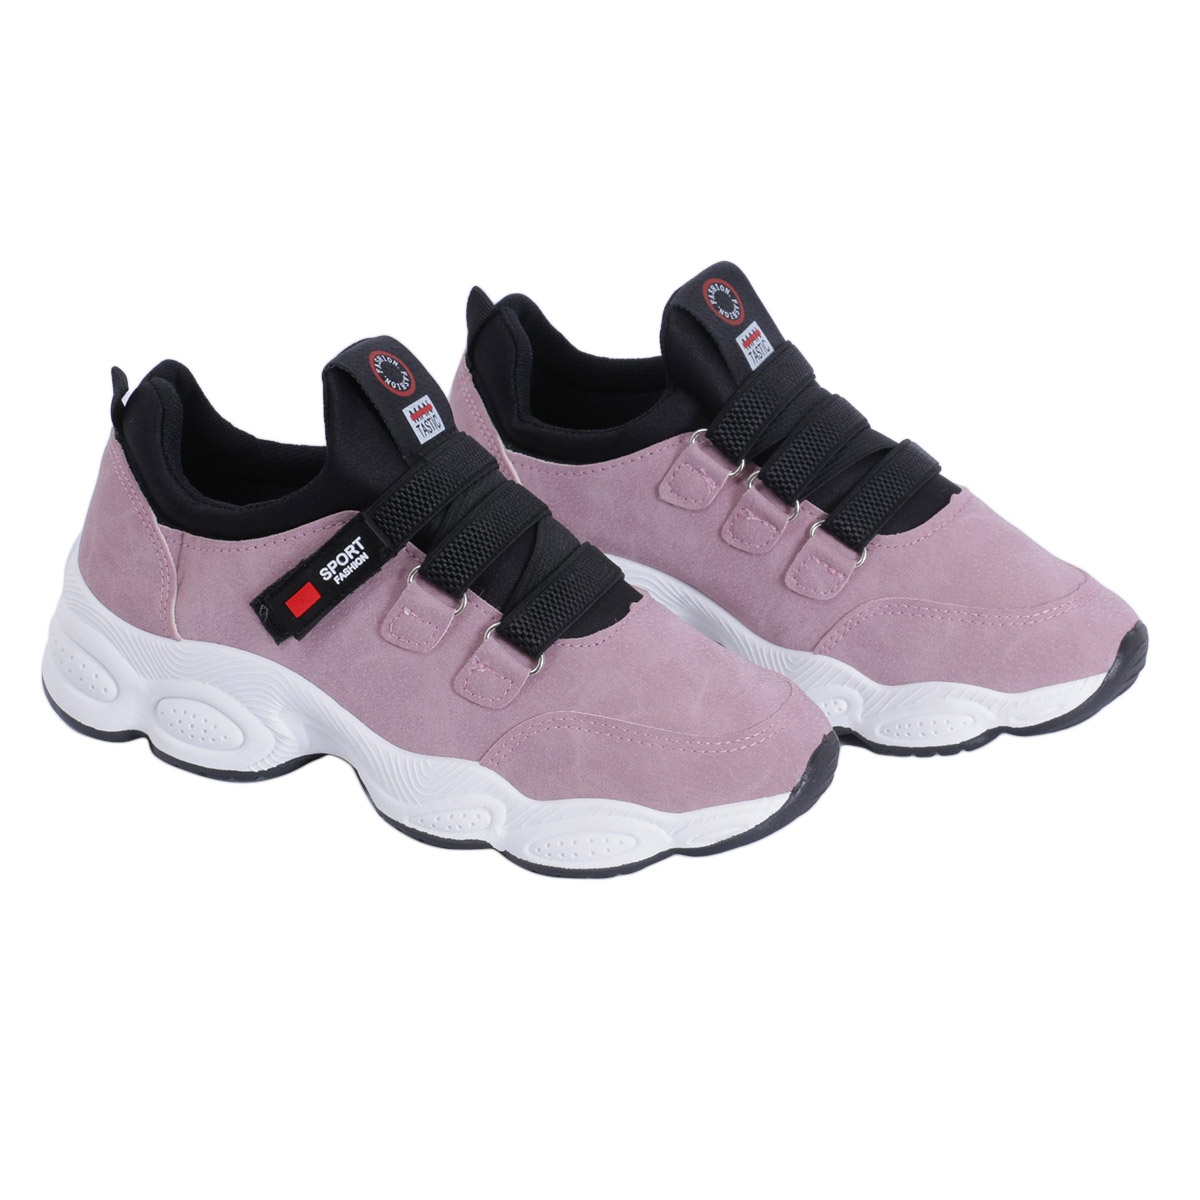 ladies sports shoes with price